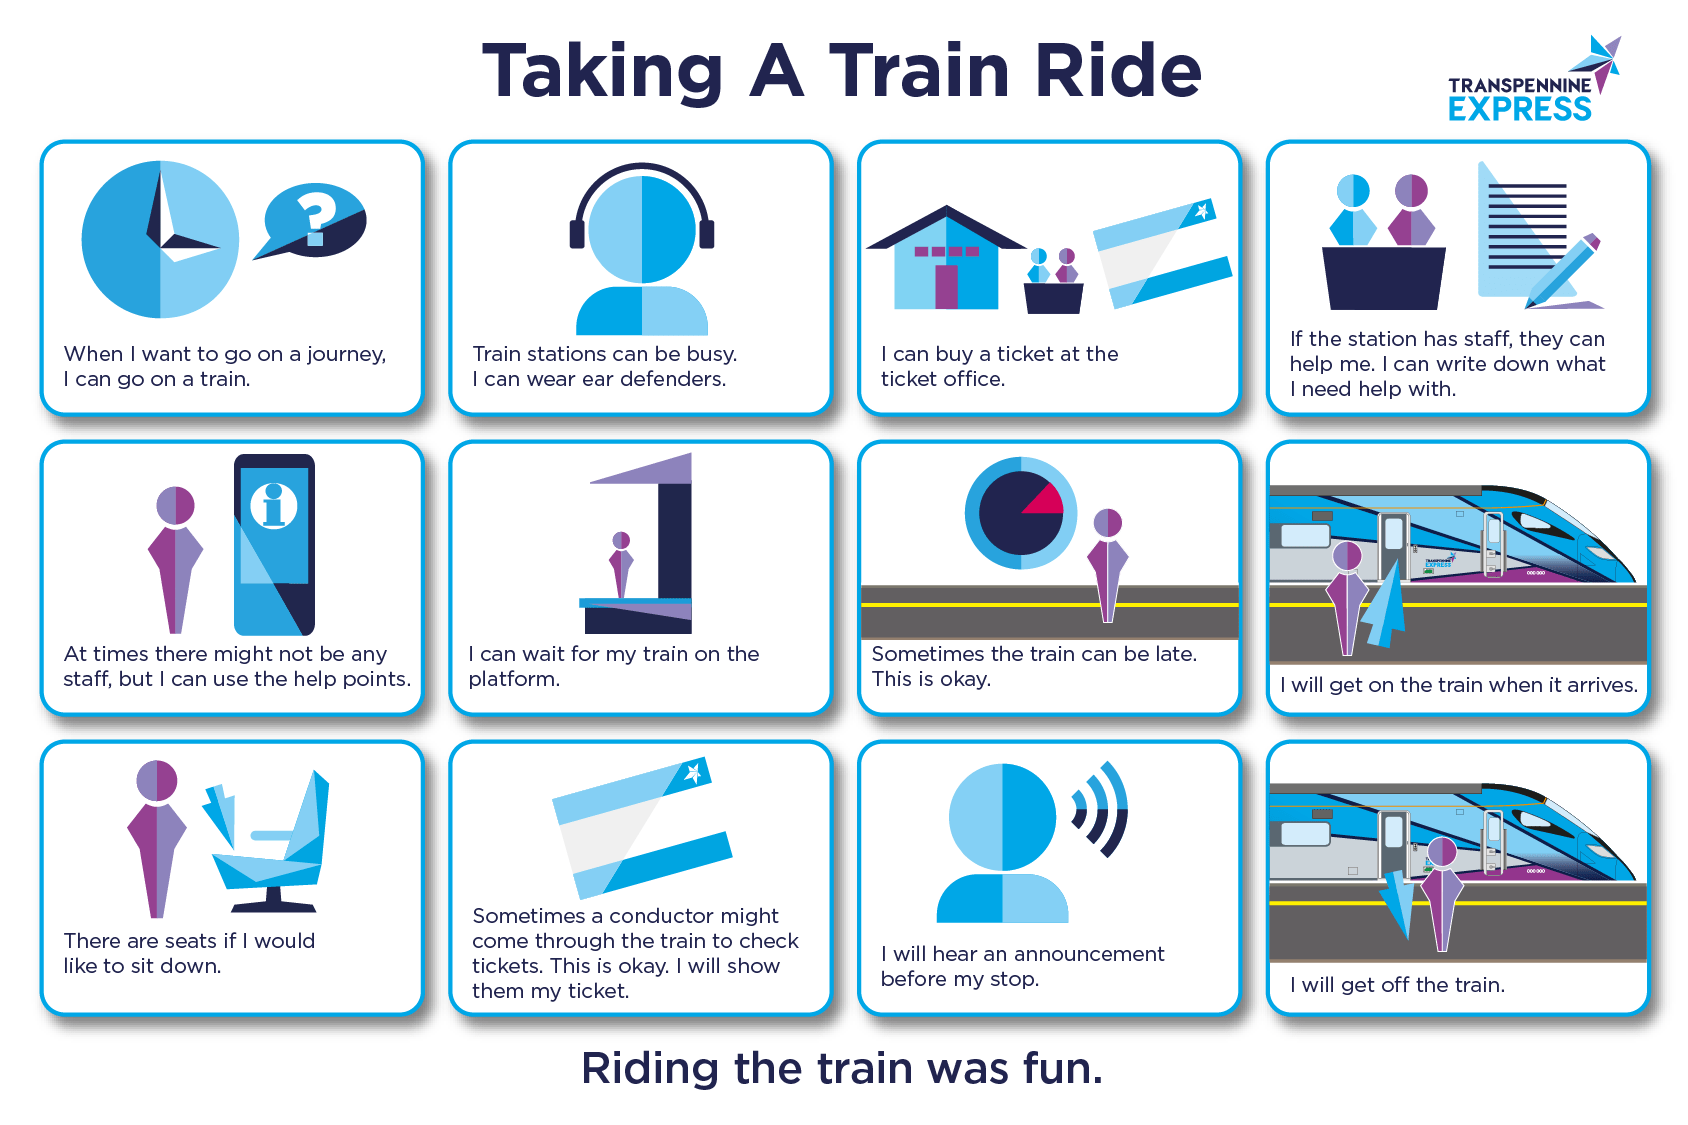 Taking a train ride social story infographic